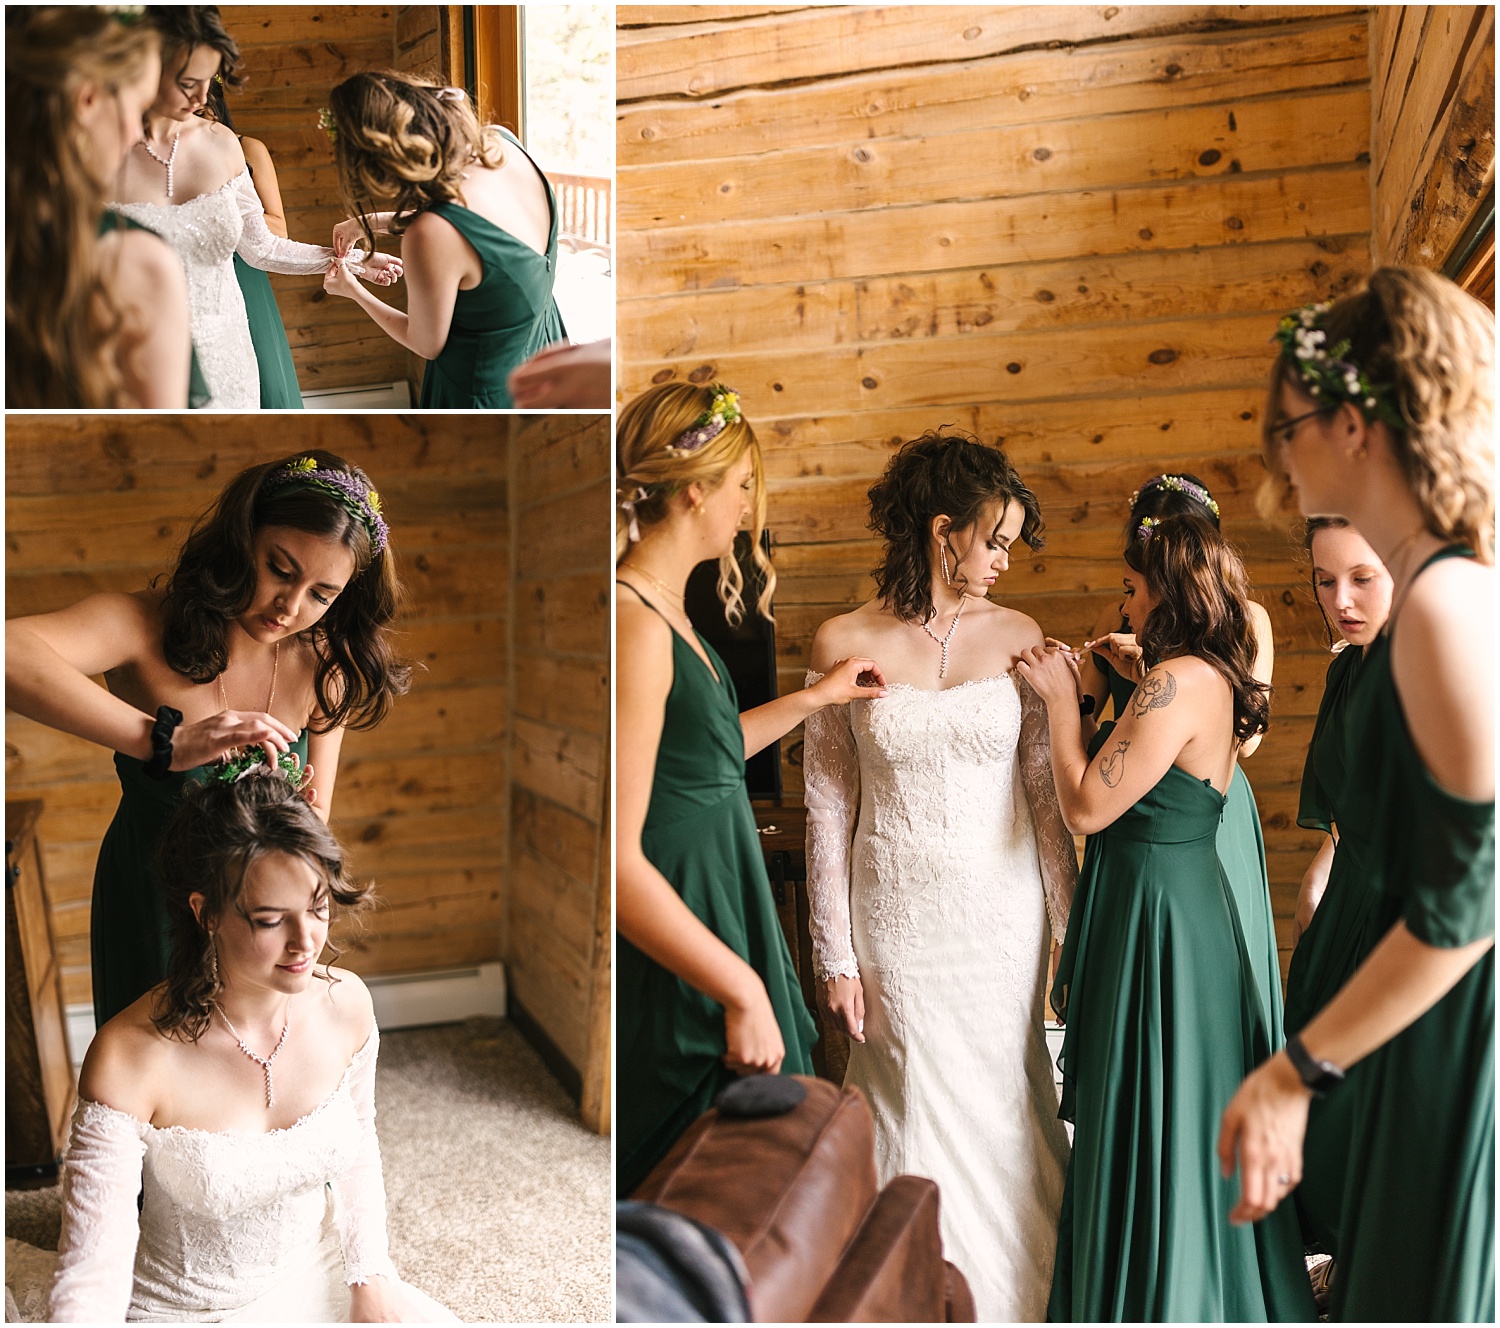 Bridesmaids dressing the bride before the wedding ceremony